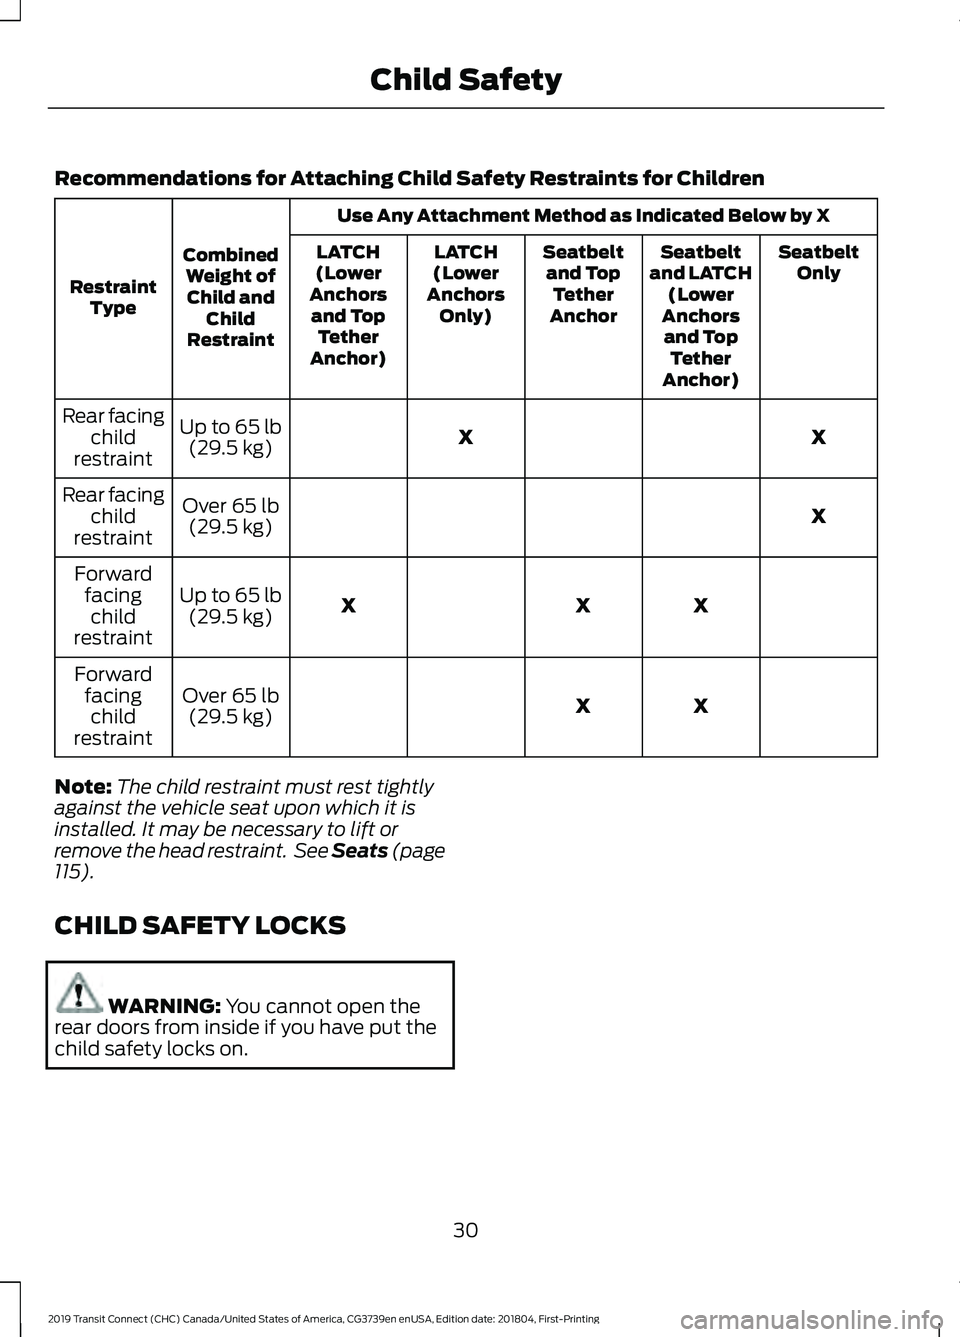 FORD TRANSIT CONNECT 2019 Owners Guide Recommendations for Attaching Child Safety Restraints for Children
Use Any Attachment Method as Indicated Below by X
Combined Weight ofChild and Child
Restraint
Restraint
Type Seatbelt
Only
Seatbelt
a